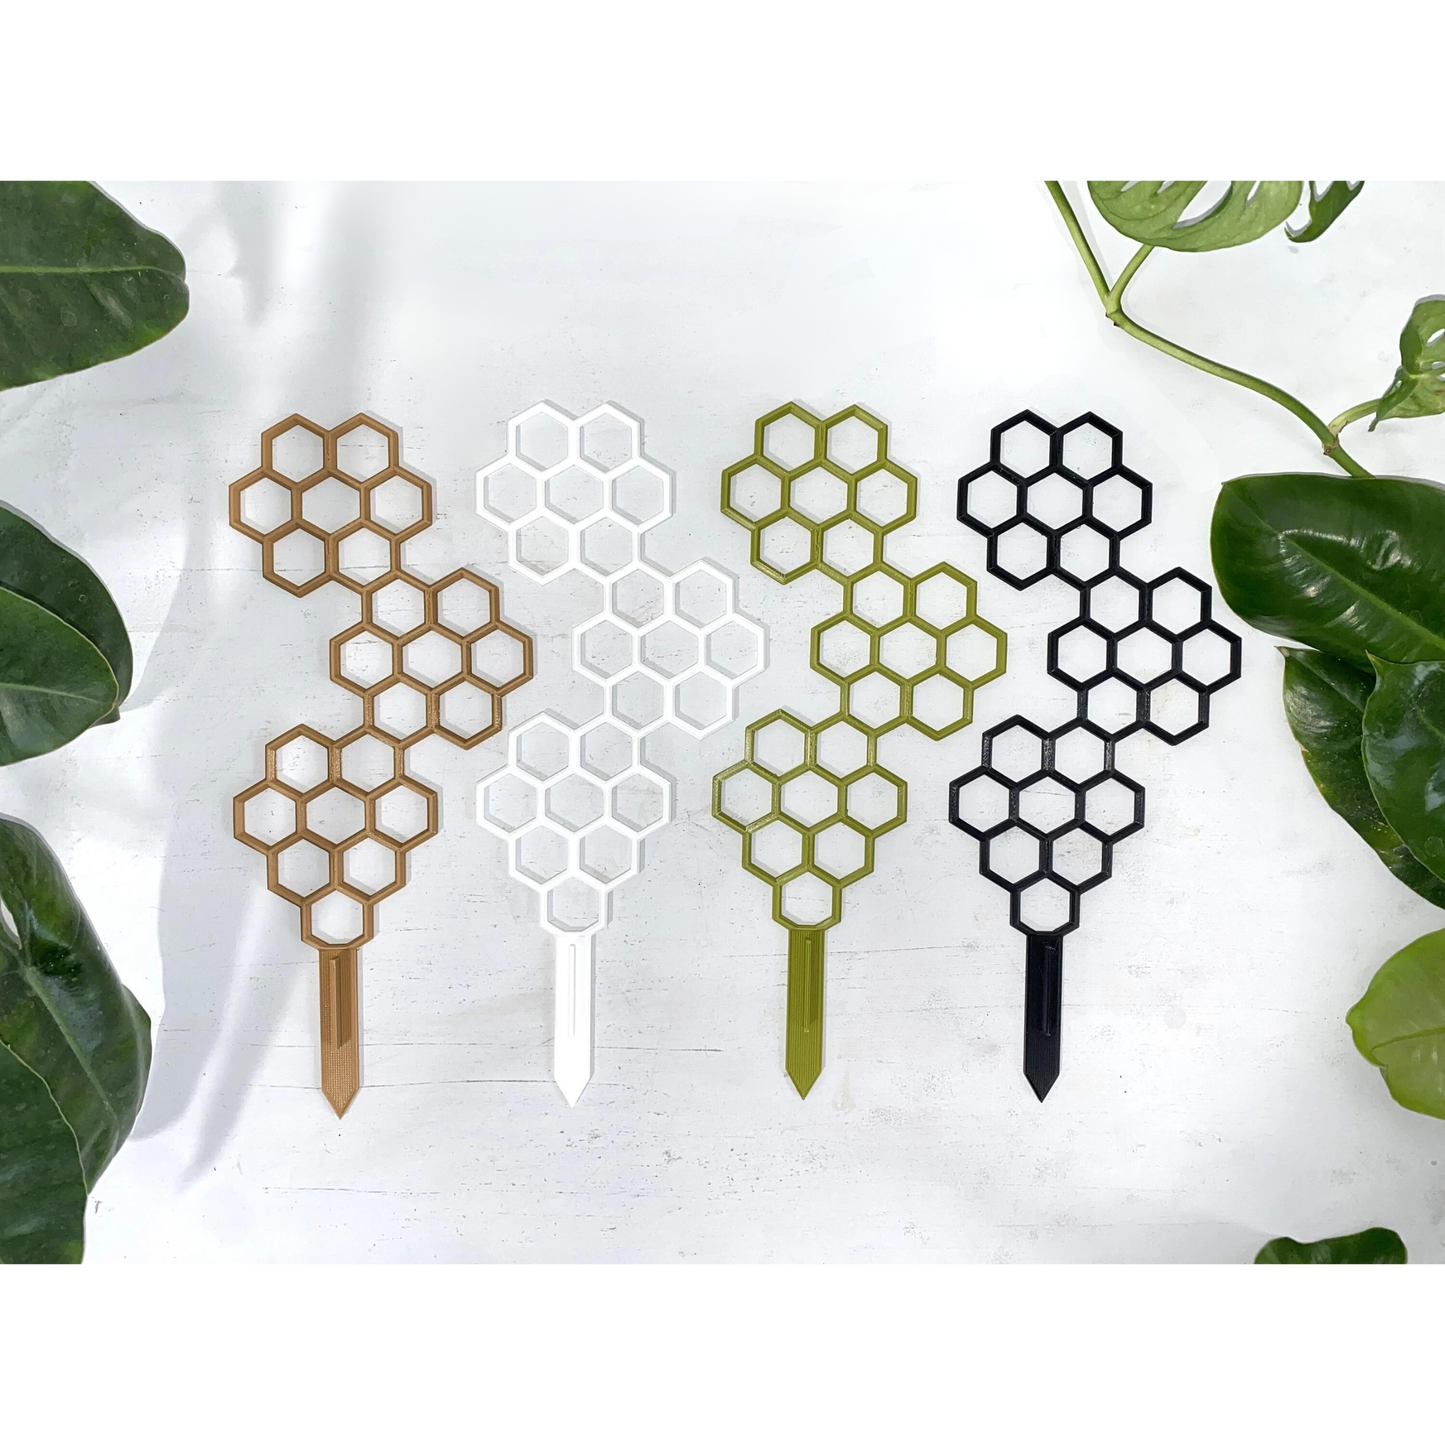 Hexagon Plant Trellis / Geometric 2D Moss Pole / Totem / Plant Support Stake by OrchidBox